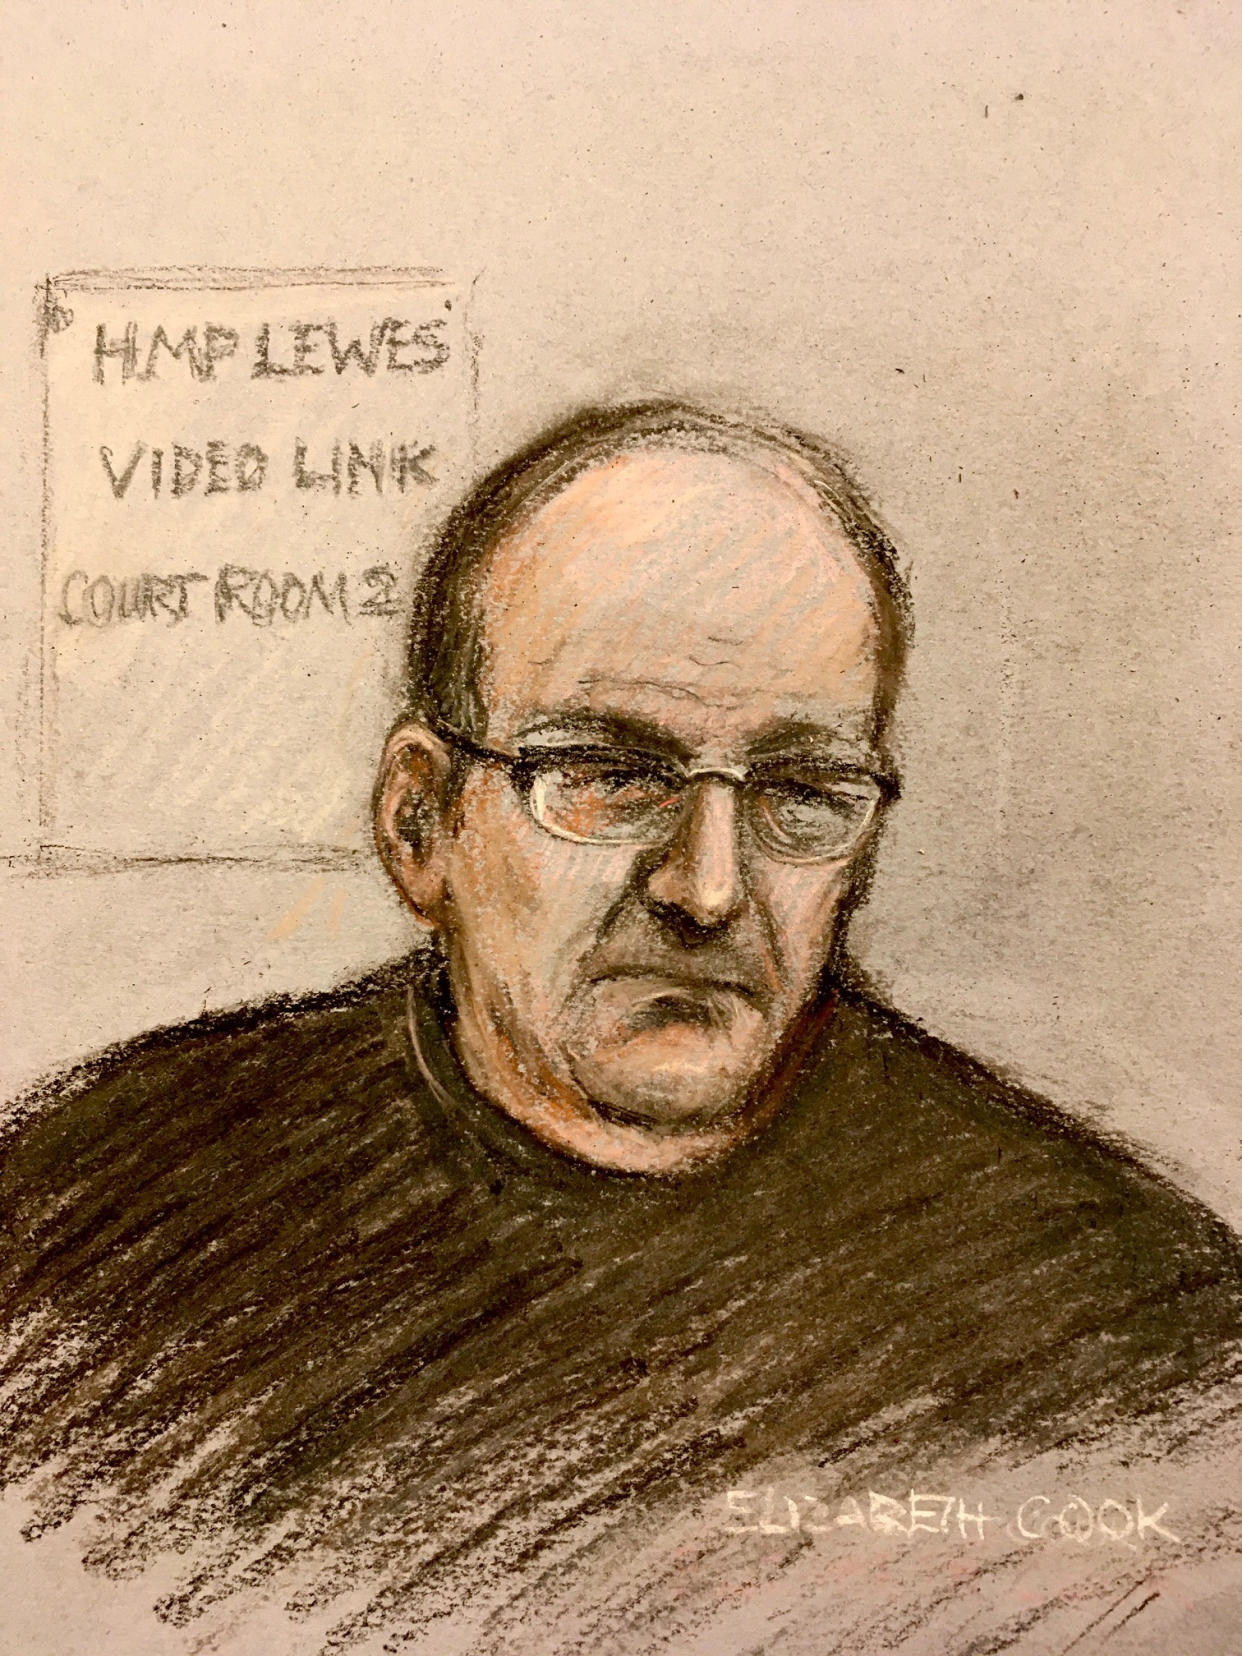 Court artist sketch by Elizabeth Cook of David Fuller appearing via video link at Maidstone Crown Court charged with two counts of murder in connection with the deaths of Wendy Knell and Caroline Pierce in 1987.